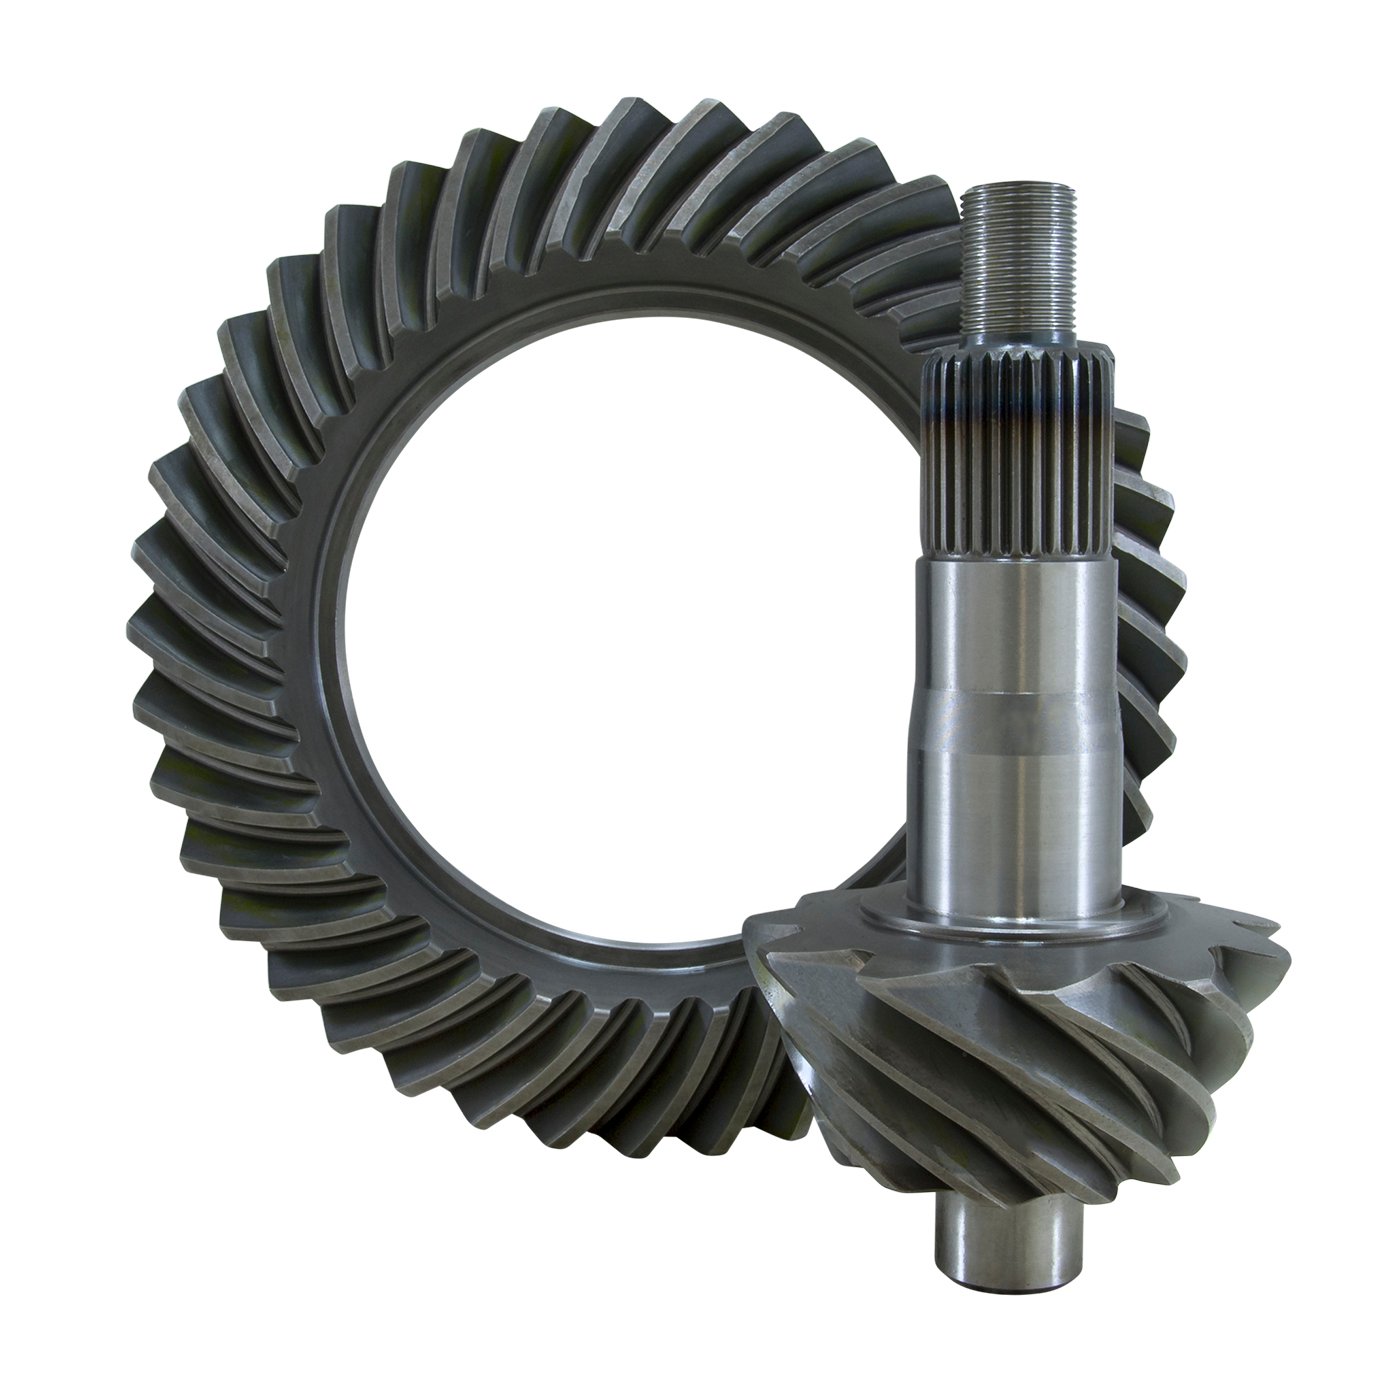 USA Standard 36187 Ring & Pinion Set, For 10.5 in. GM 14 Bolt Truck, 5.13 Ratio, Thick